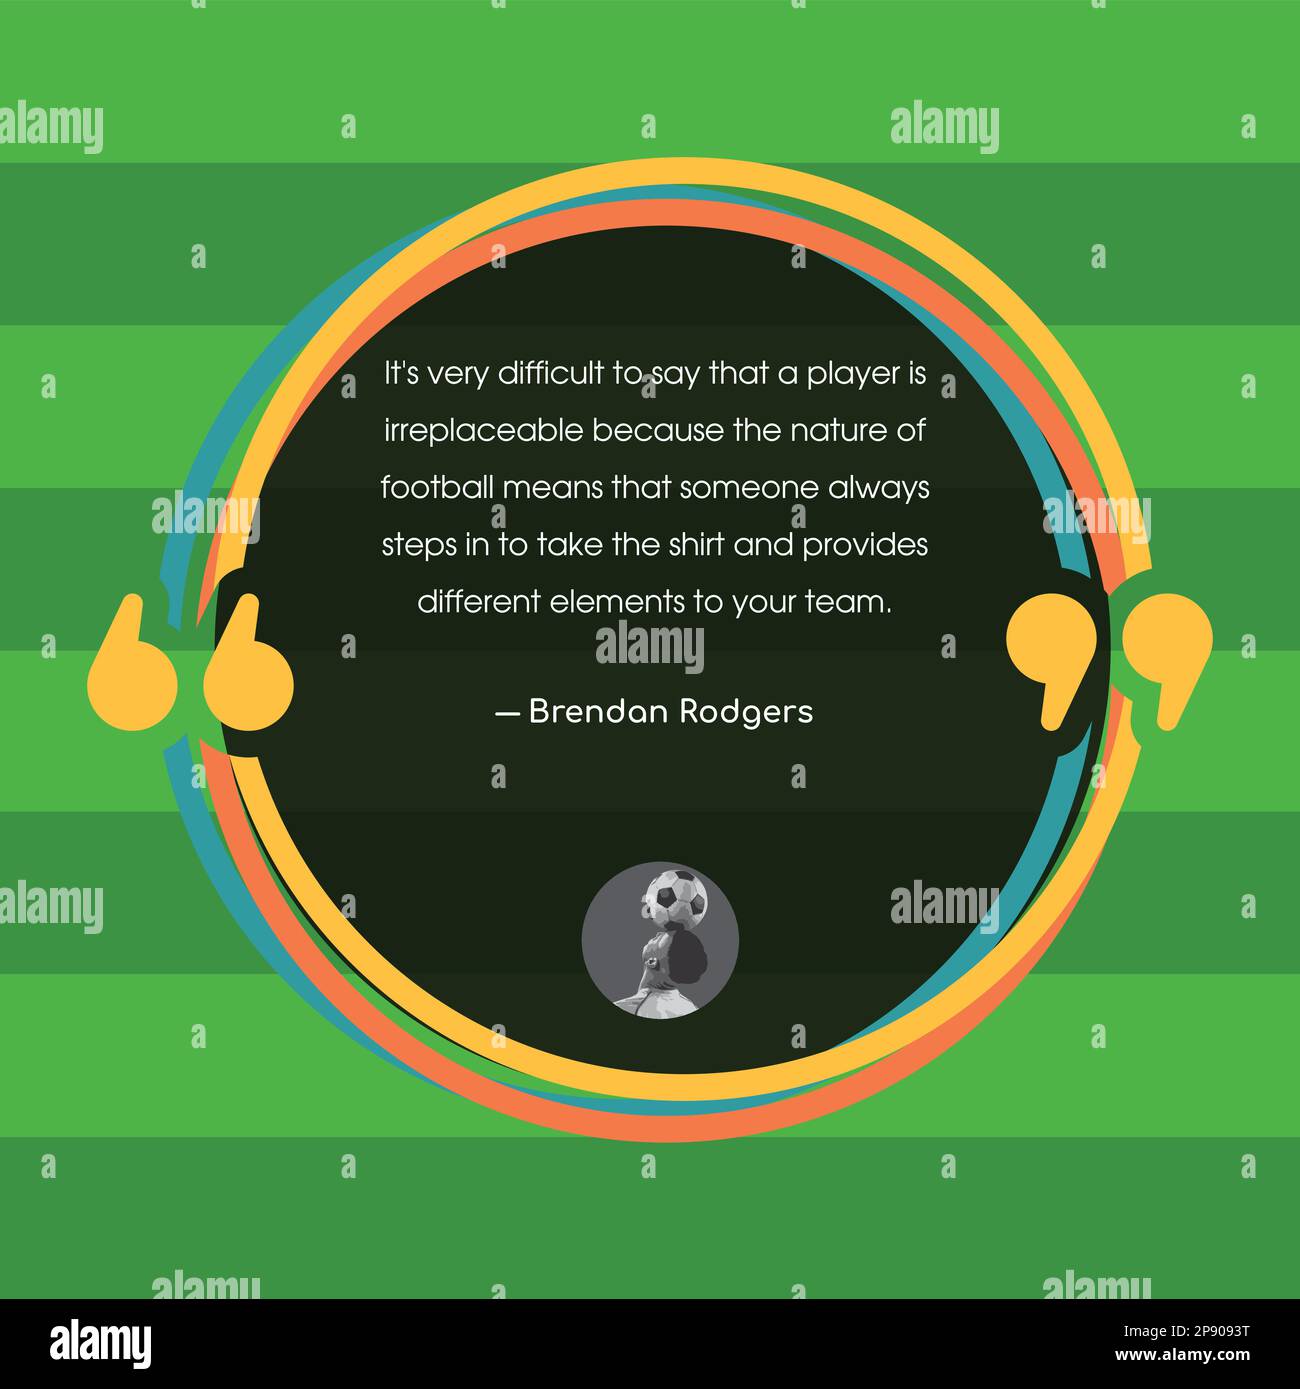 Bill Shankly Quotes for Inspiration and Motivation - Bill Shankly ...